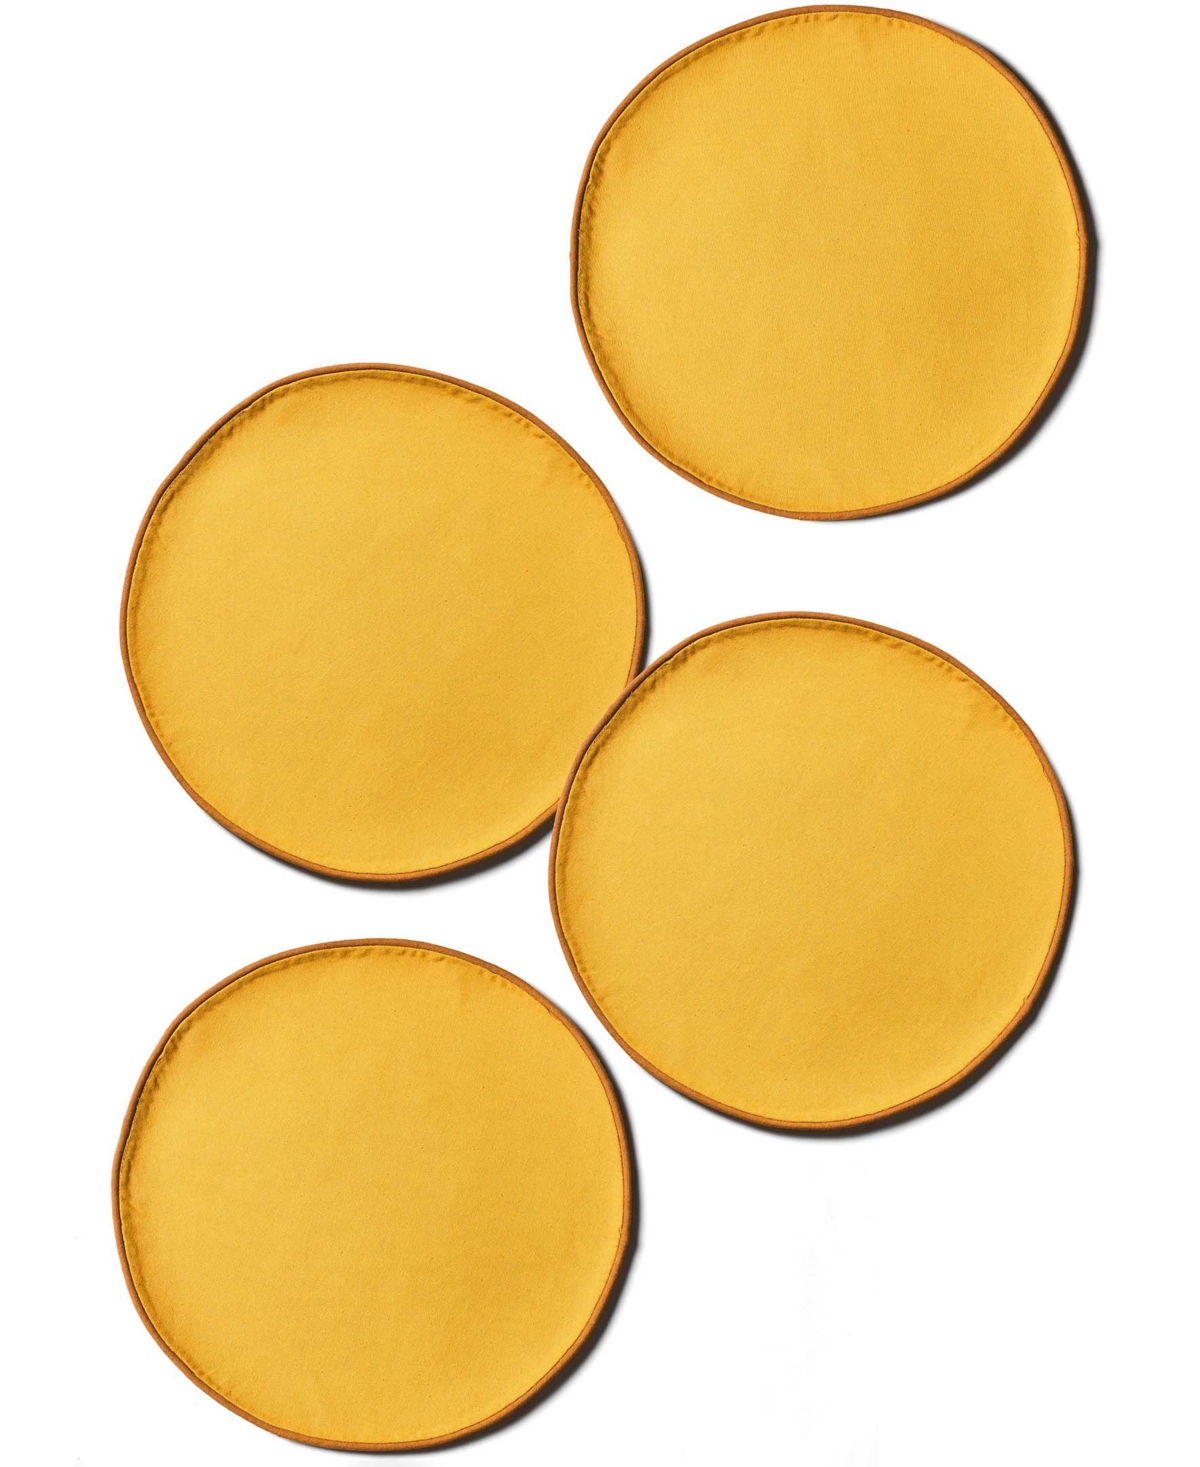 Coton Colors Block Round Placemat Set Of 4, Service For 4 In Brass